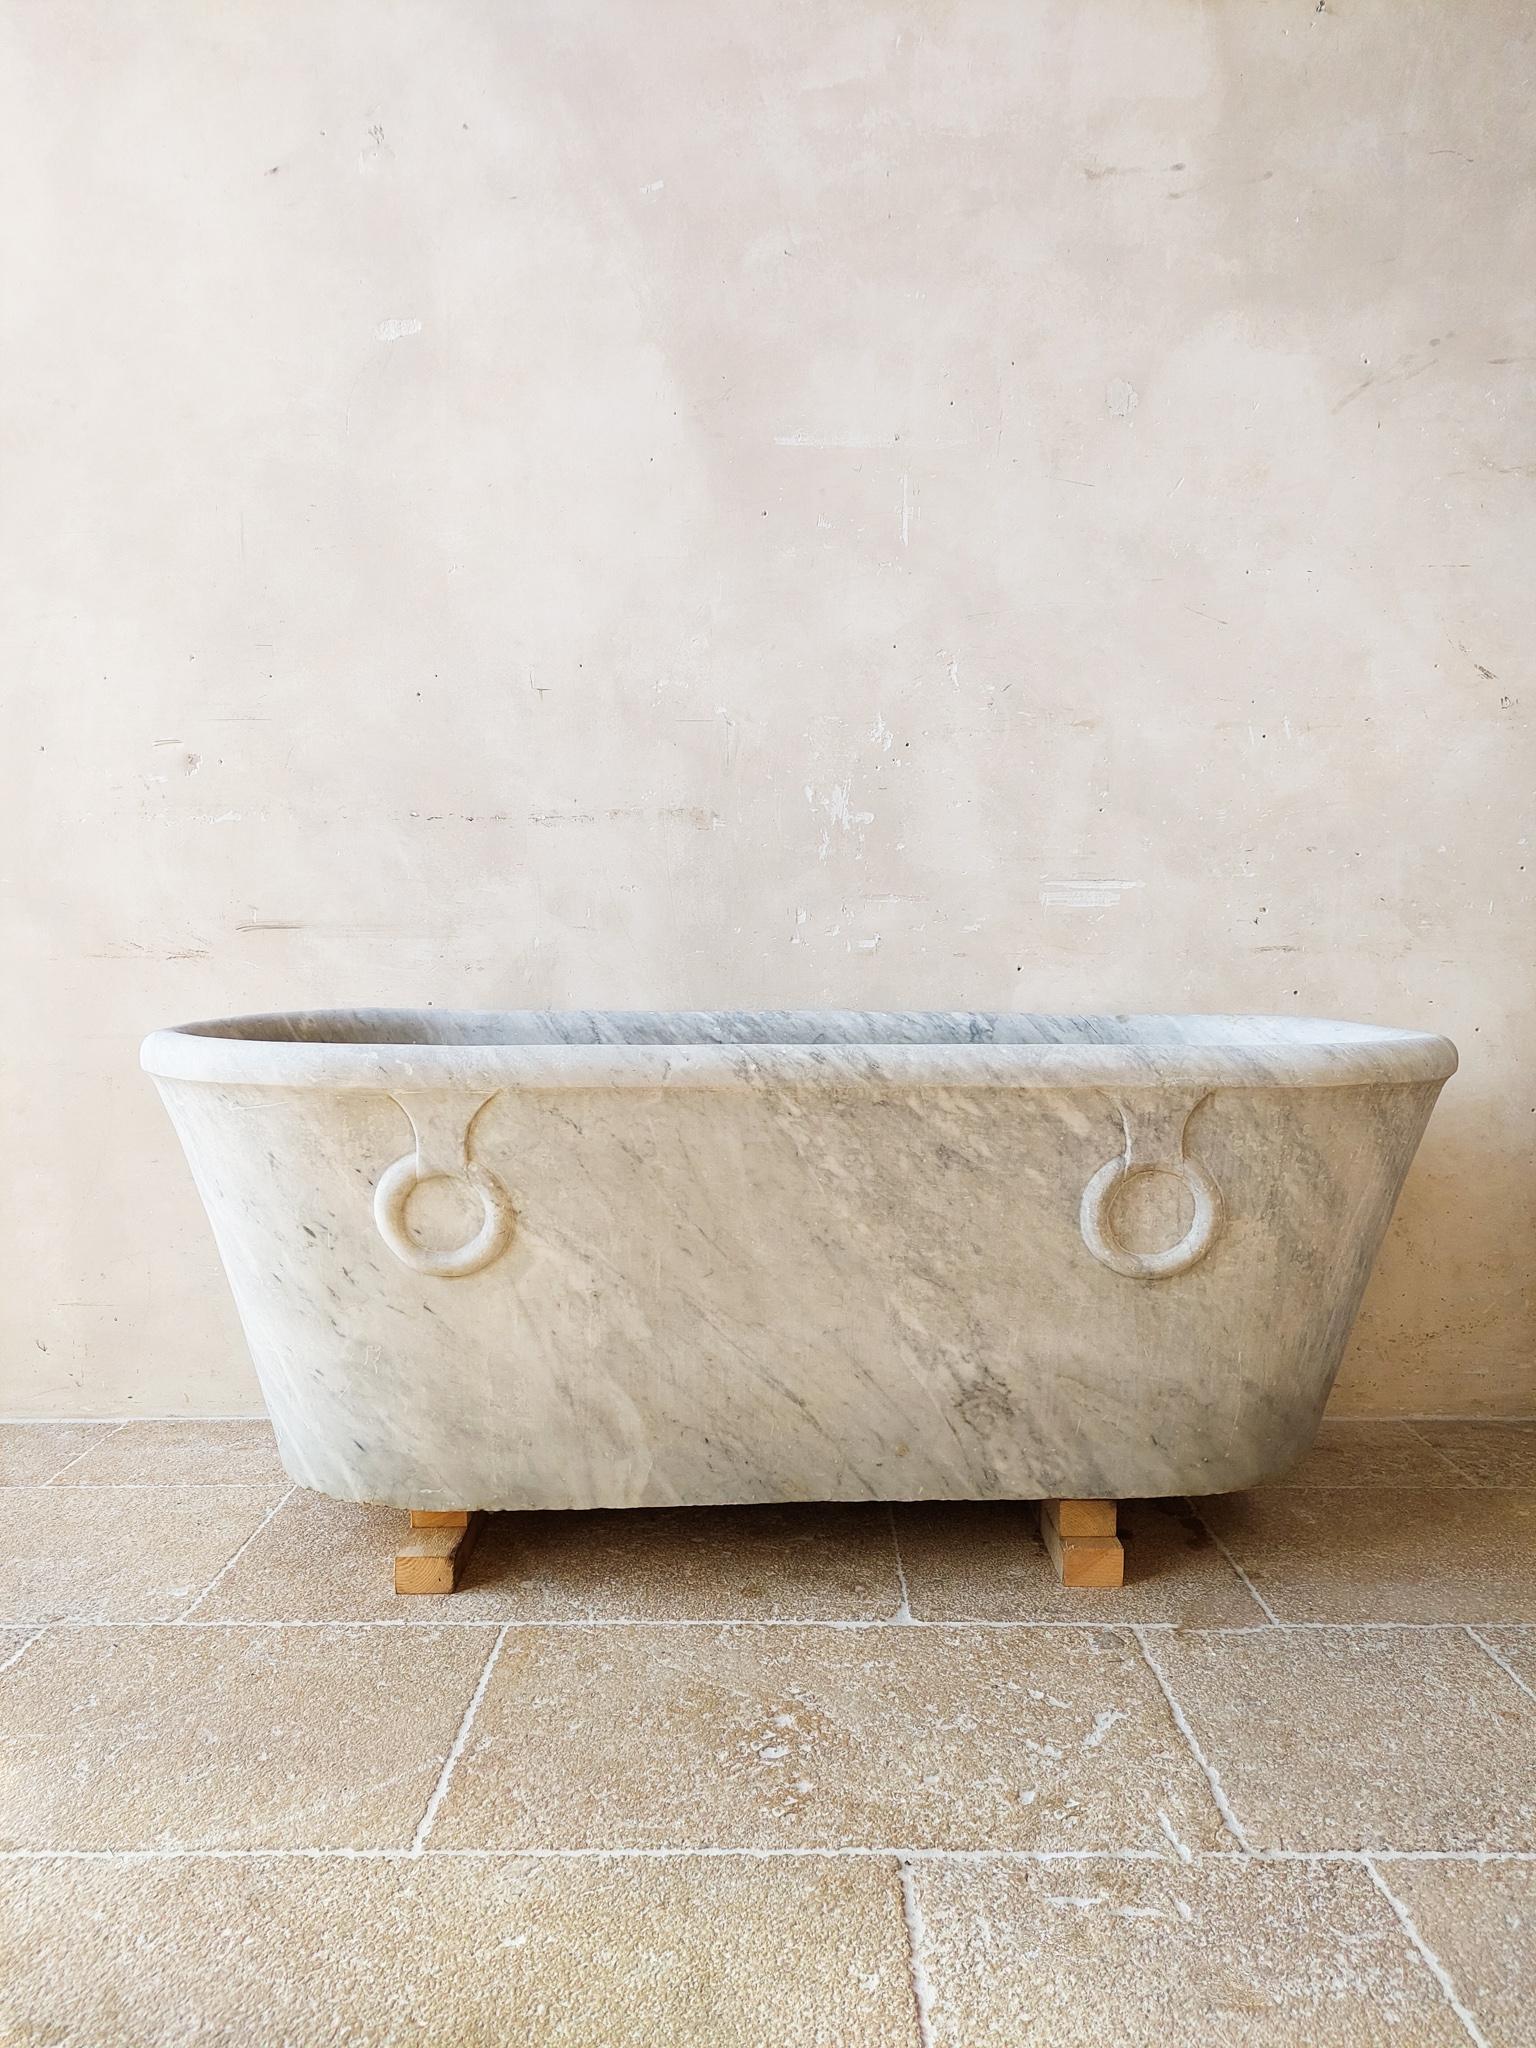 Antique handcarved Carrara marble bath in Empire style. This beatiful sculpted white-grey marble bath with rings is made in the early 19th century. 

Dimensions: L 160 x W 70 x D 55 cm.